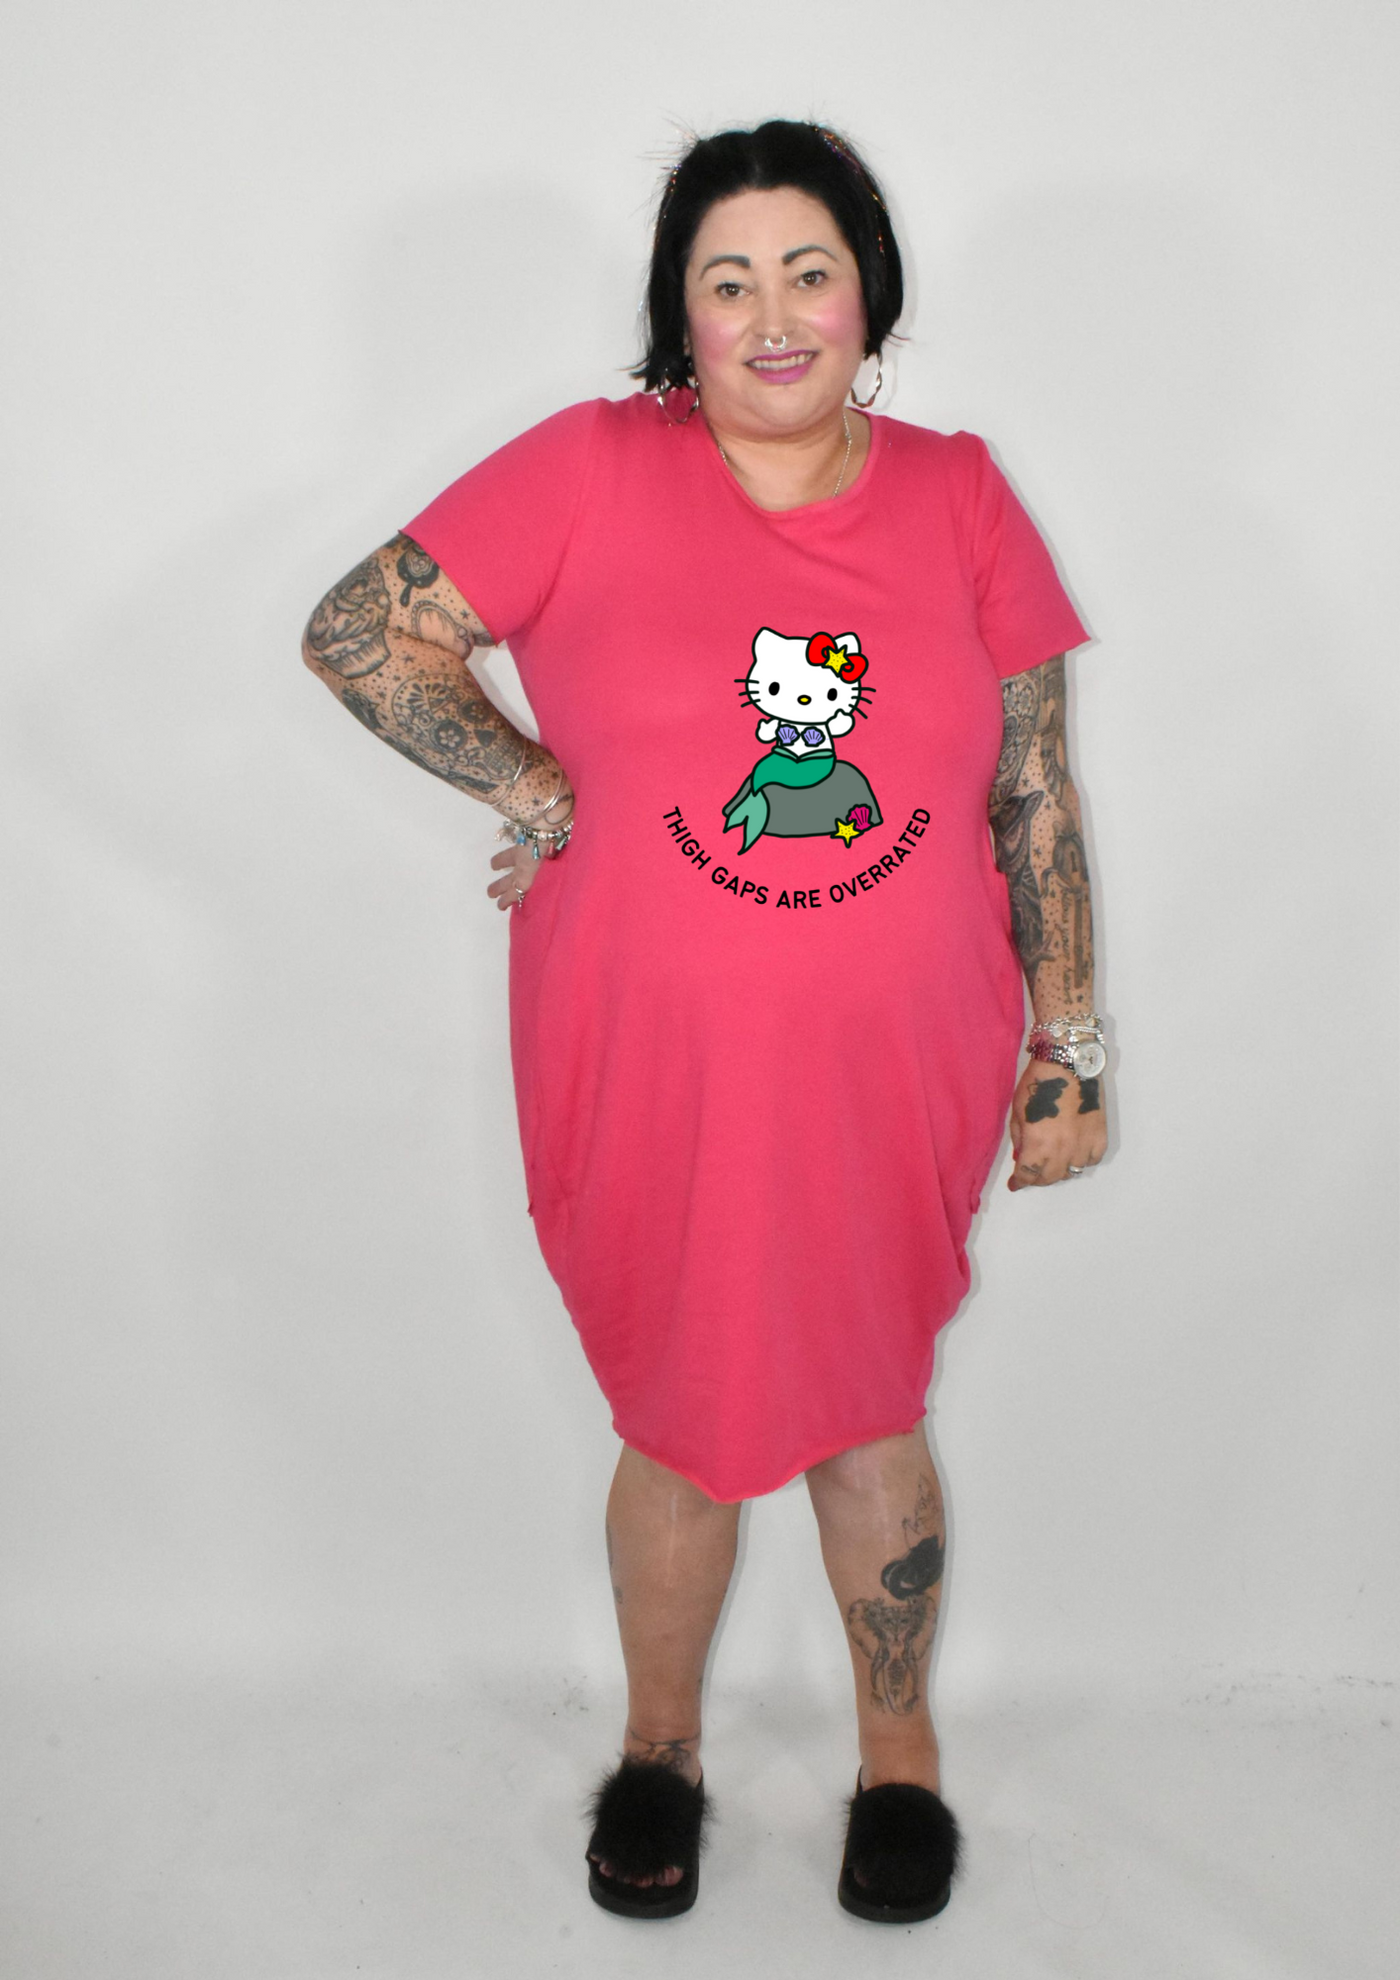 Hot Pink "Thigh Gaps Are Overrated ” Kitty T-shirt Dress